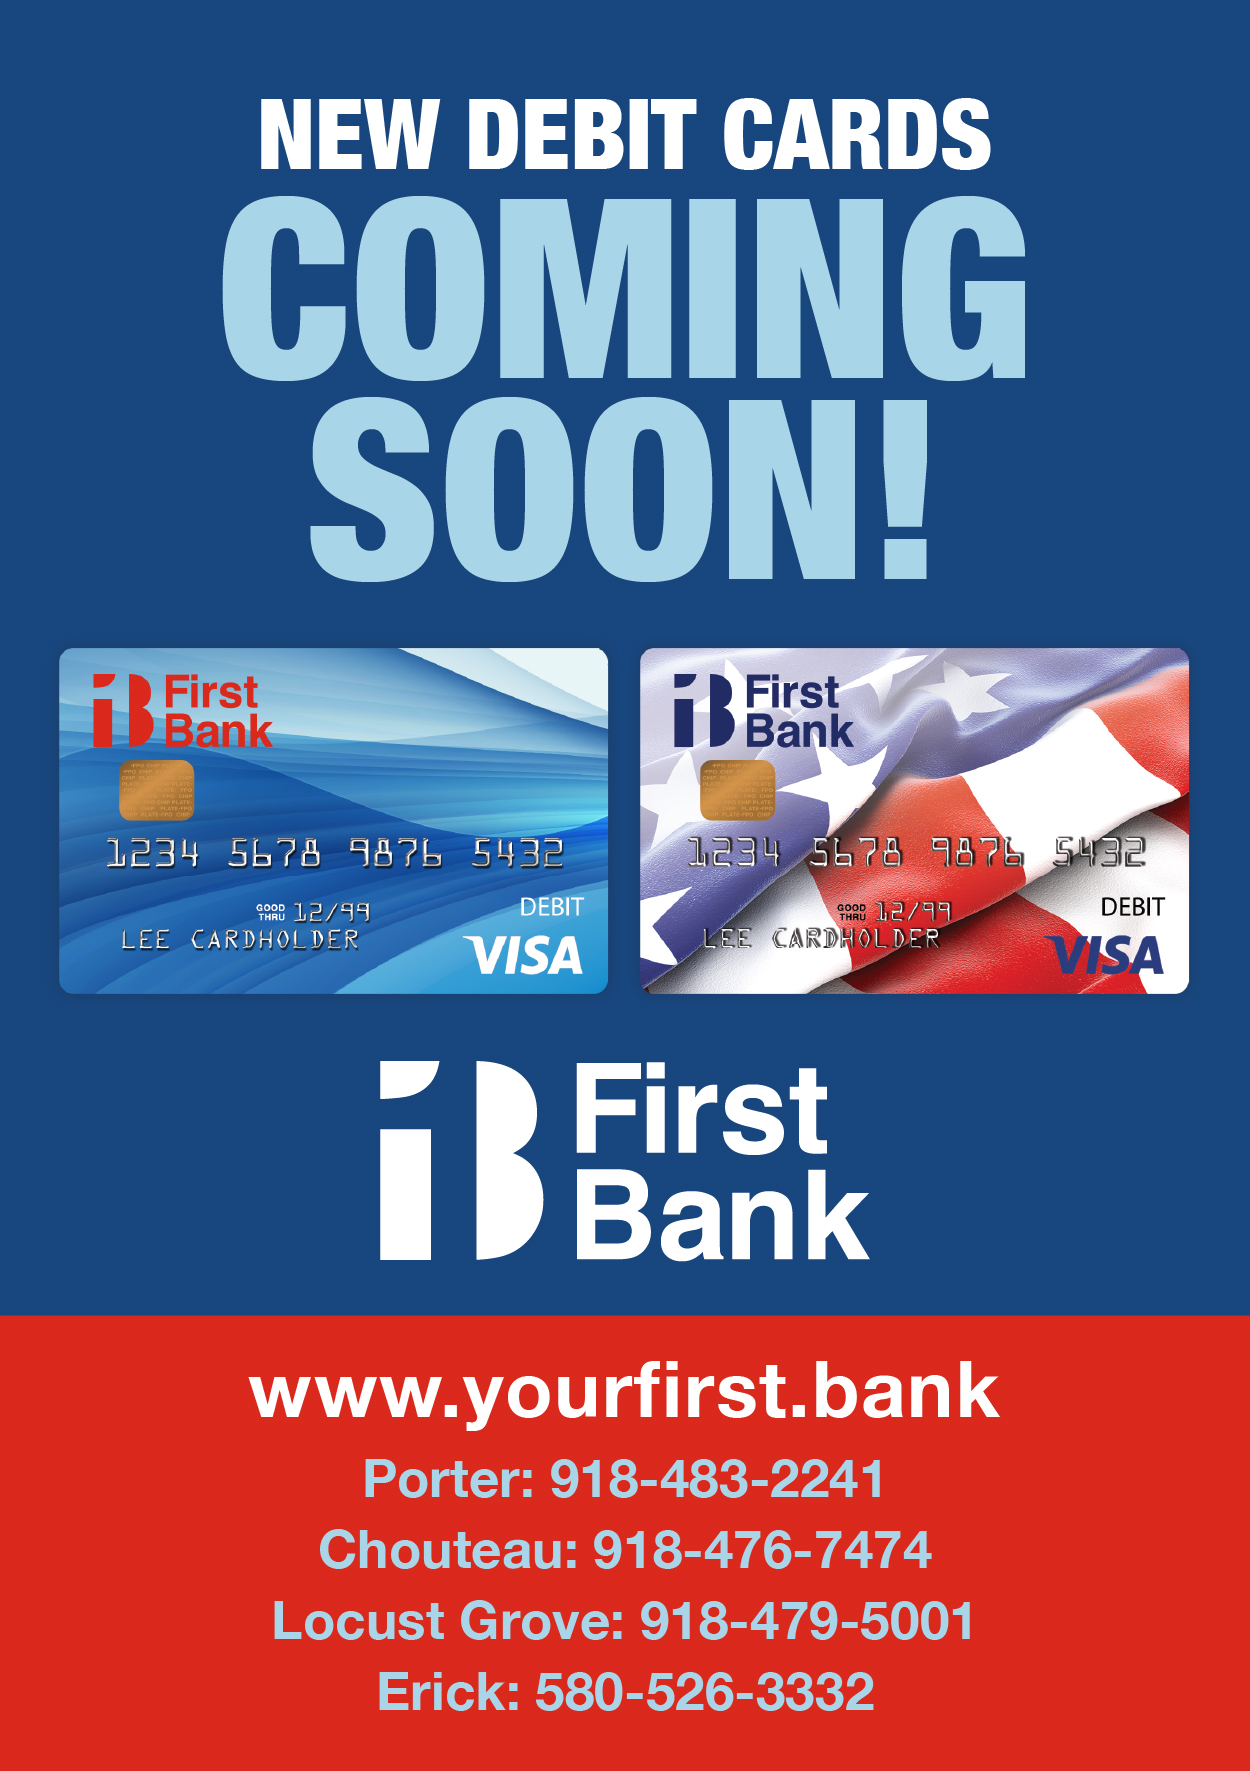 Coming Soon! First Bank is pleased to announce our new Visa Debit Card designs! The new cards and enhanced program will provide you with extra convenience and additional security for peace of mind. Look for your new card coming soon.